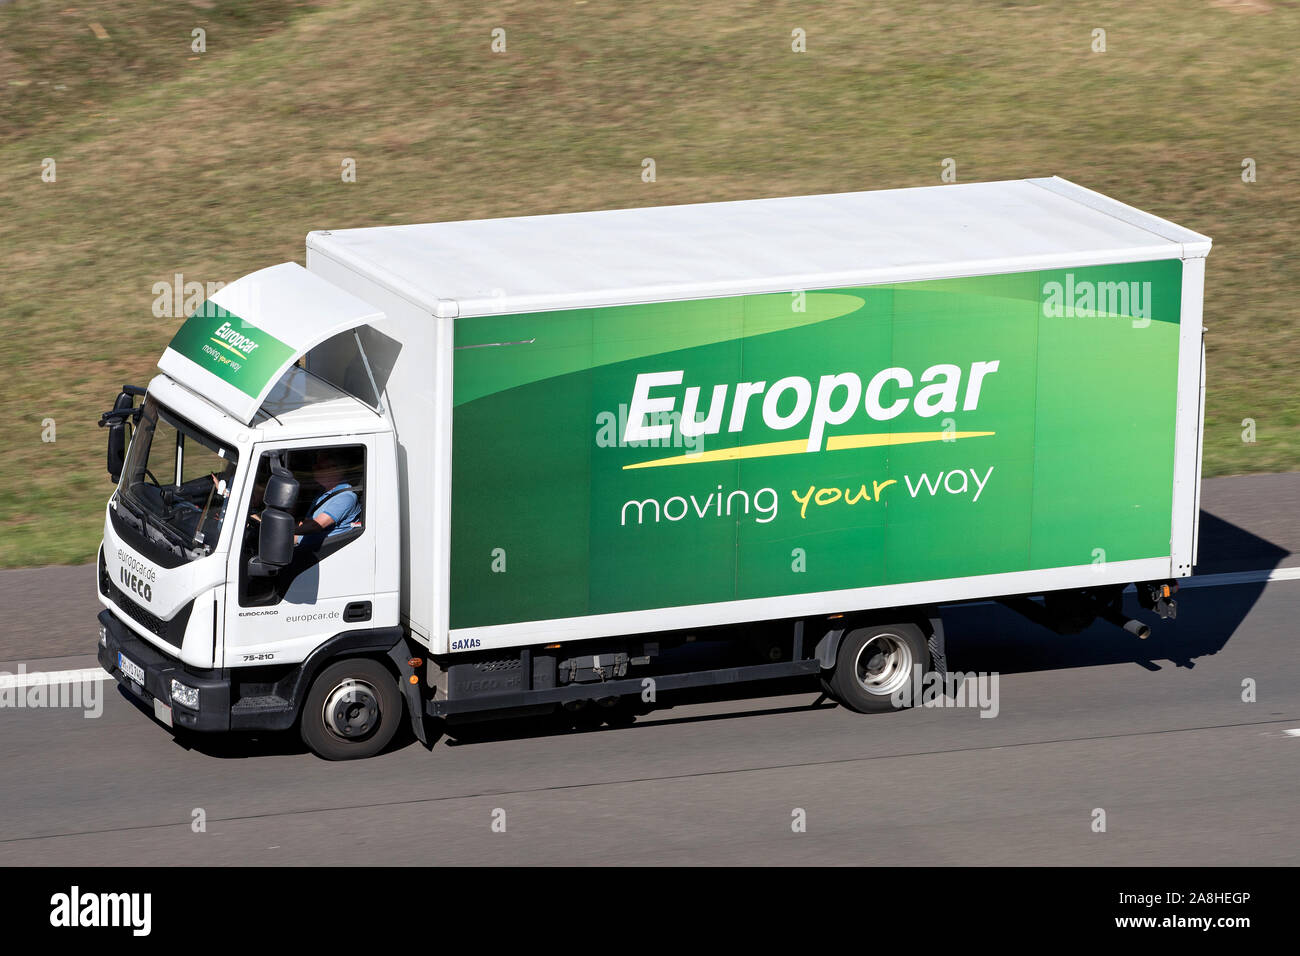 Iveco Eurocargo of Europcar on motorway. Europcar Mobility Group is a French car rental company founded in 1949 in Paris. Stock Photo